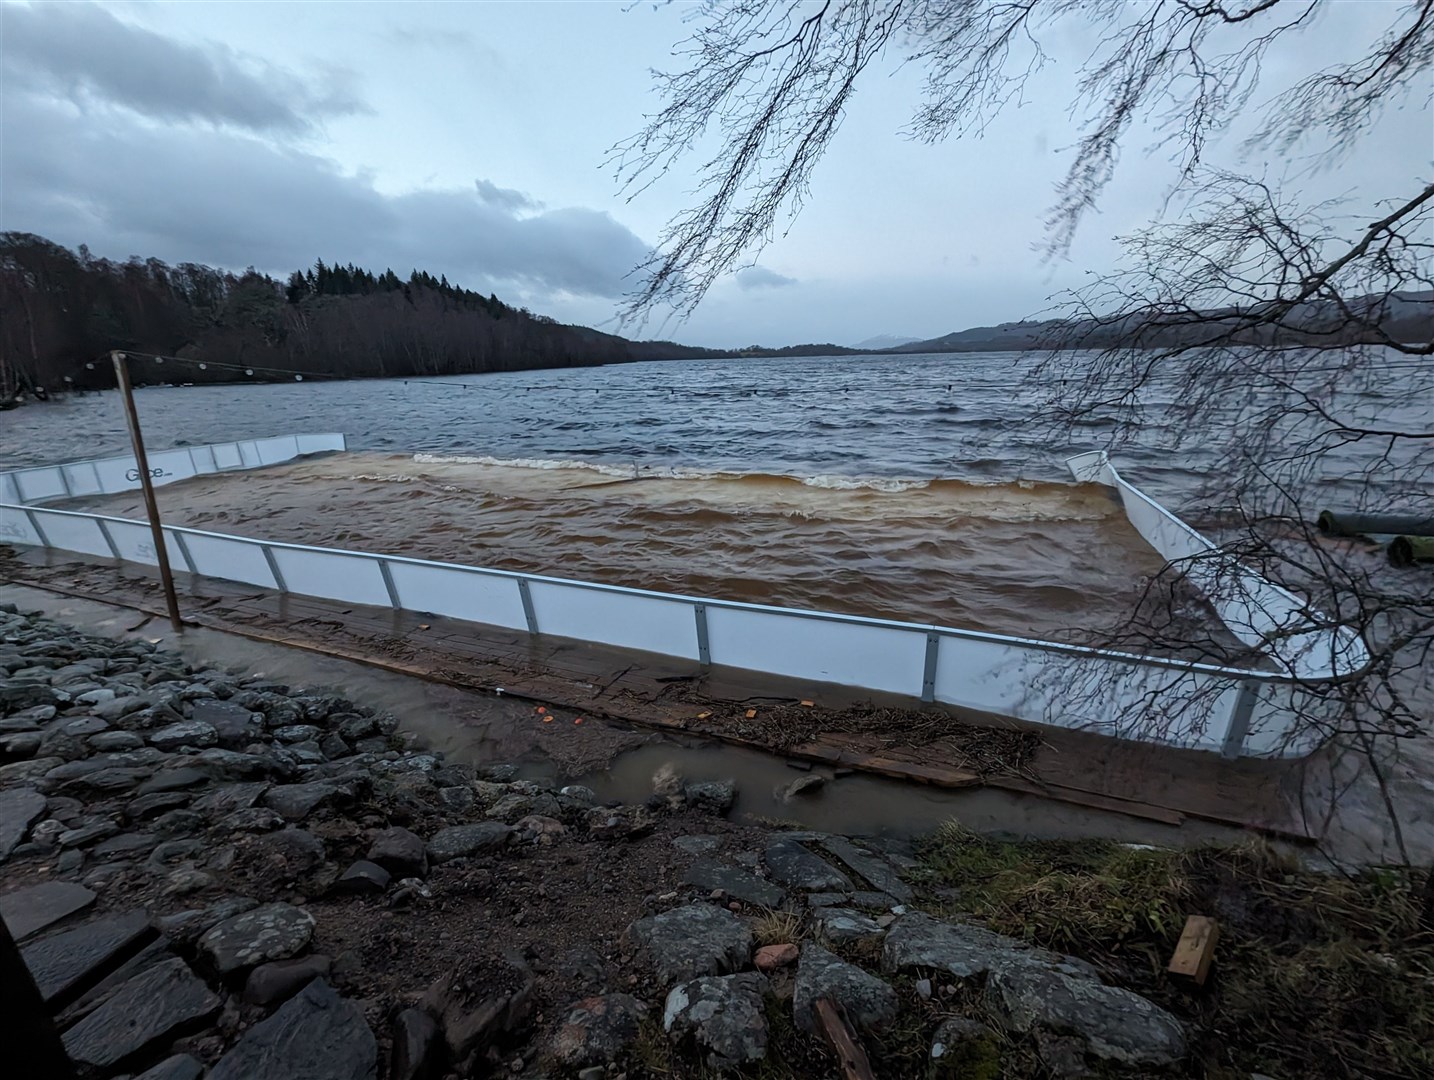 The 'Glice' rink was under water today at Loch Insh